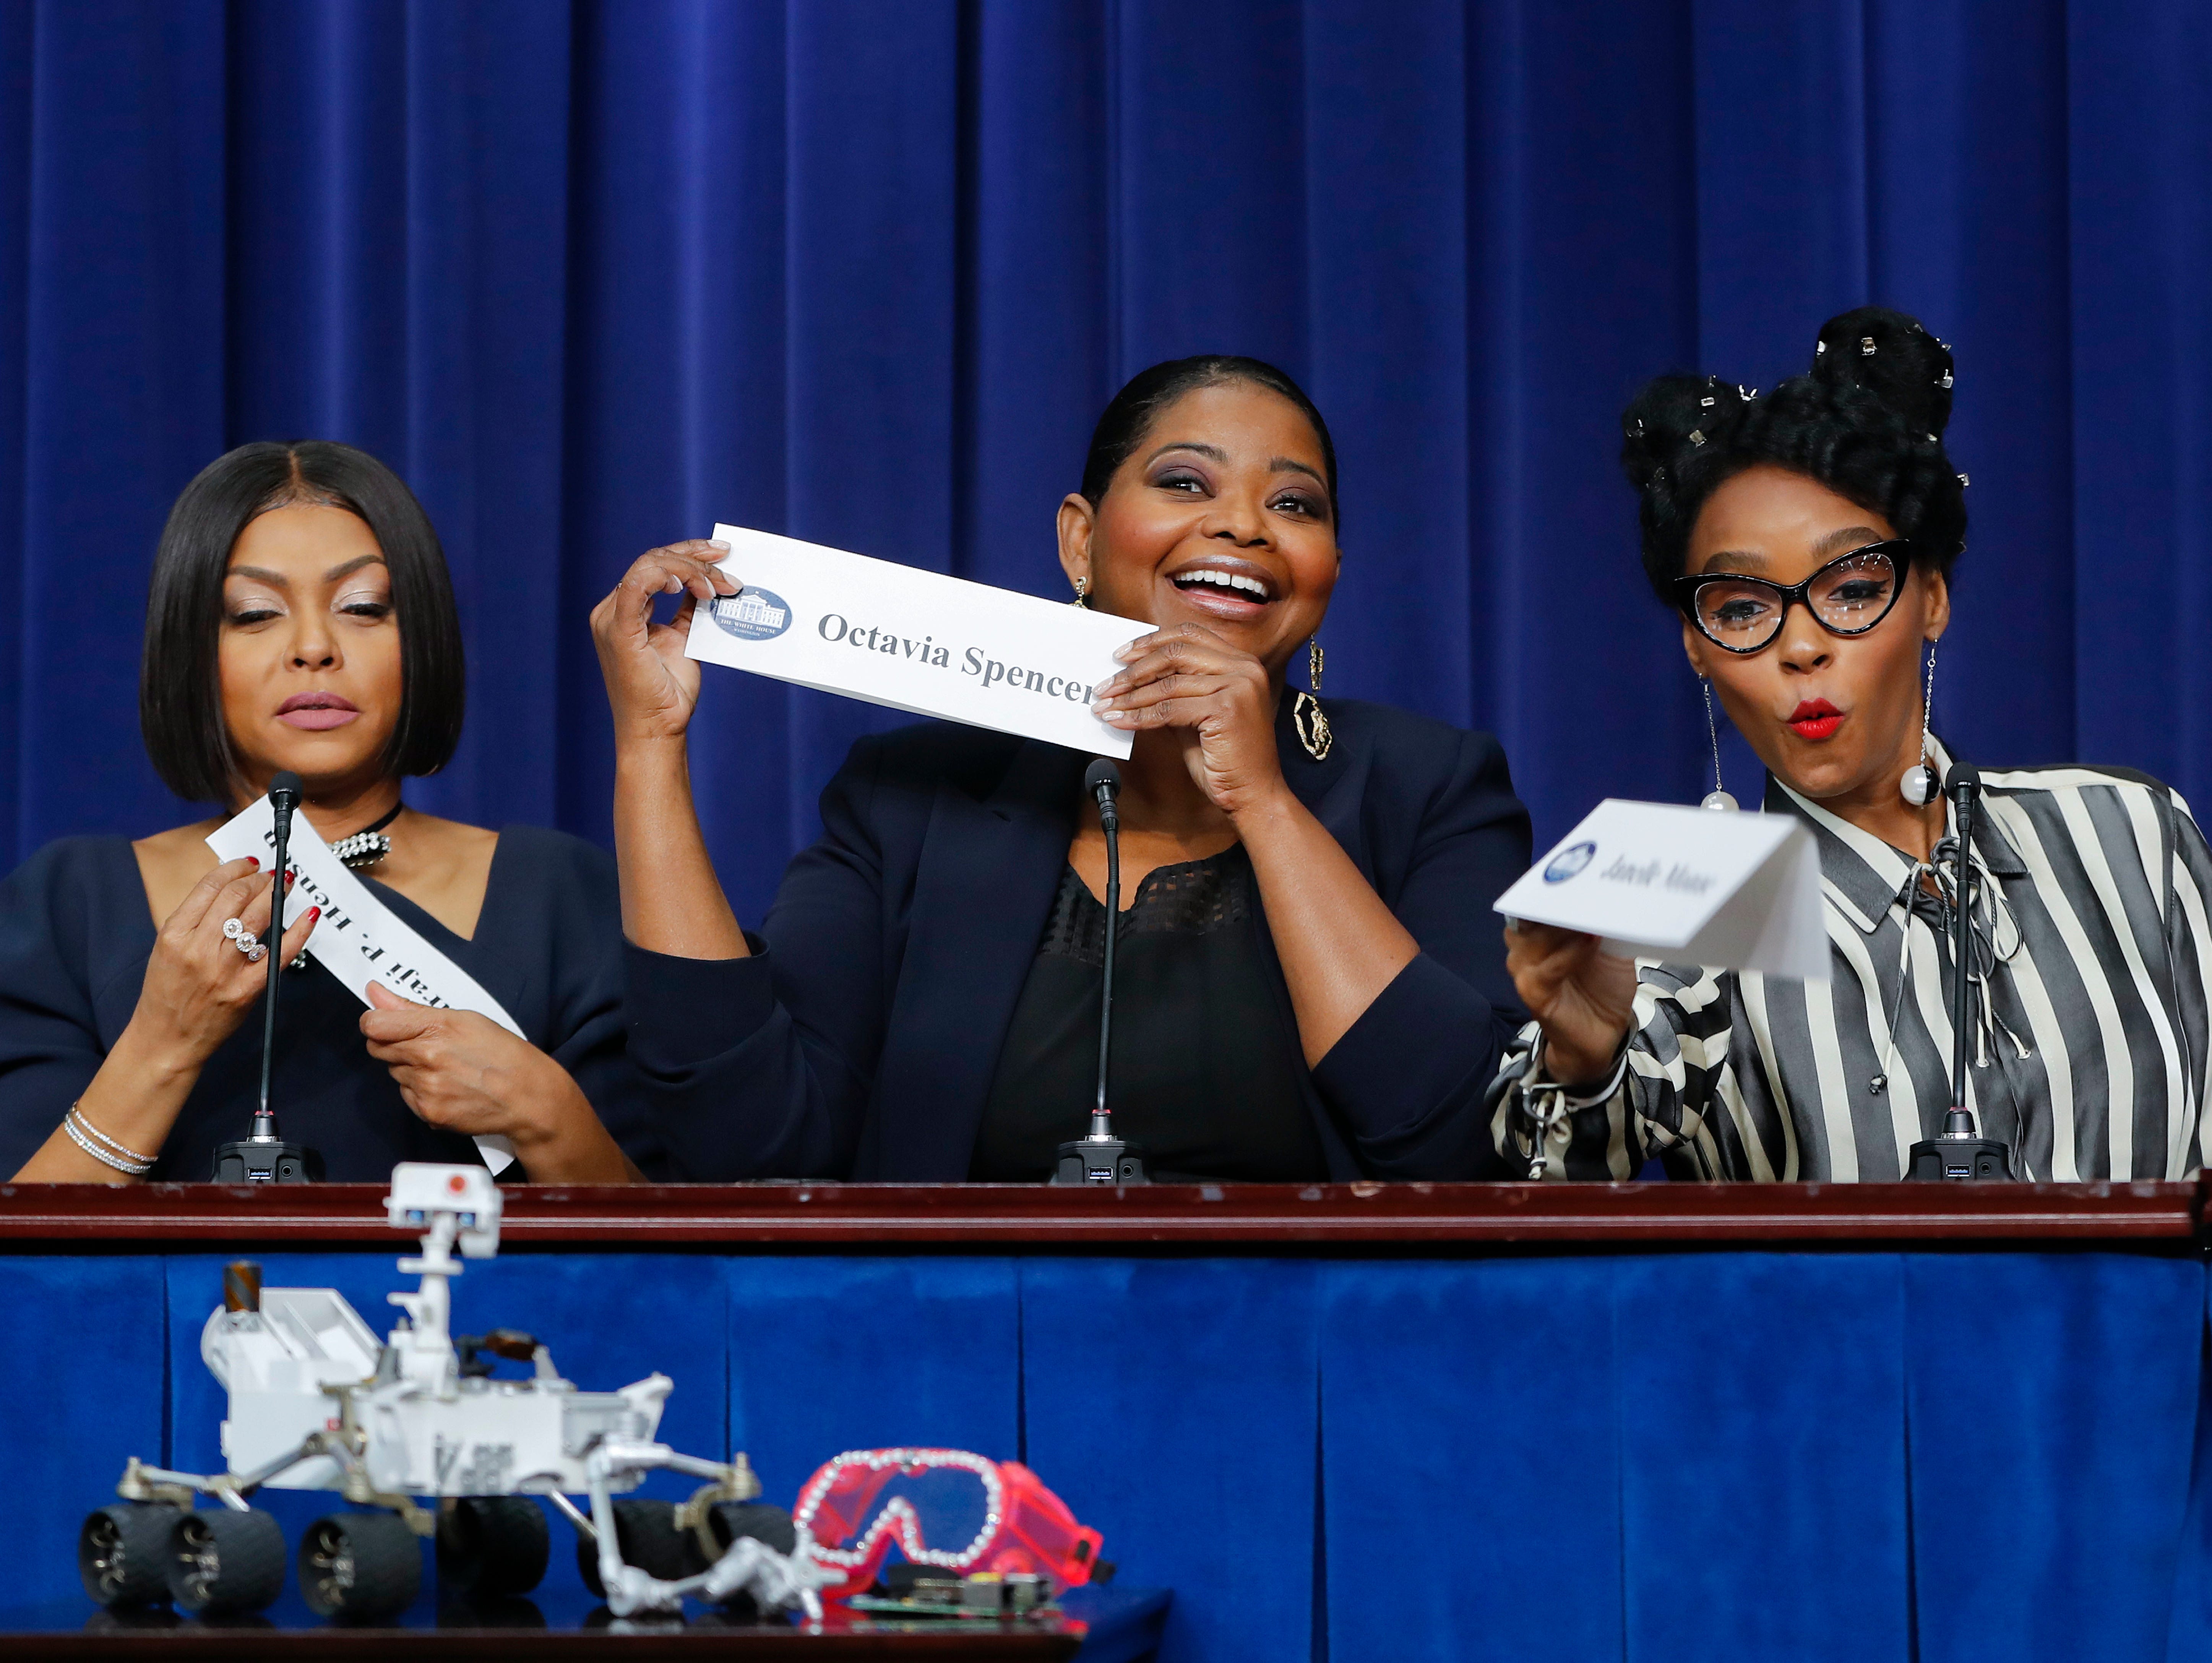 Actresses Taraji P. Henson, Octavia Spencer, and Janelle Monae snap-up their name plaques after the screening of the movie 'Hidden Figures.'